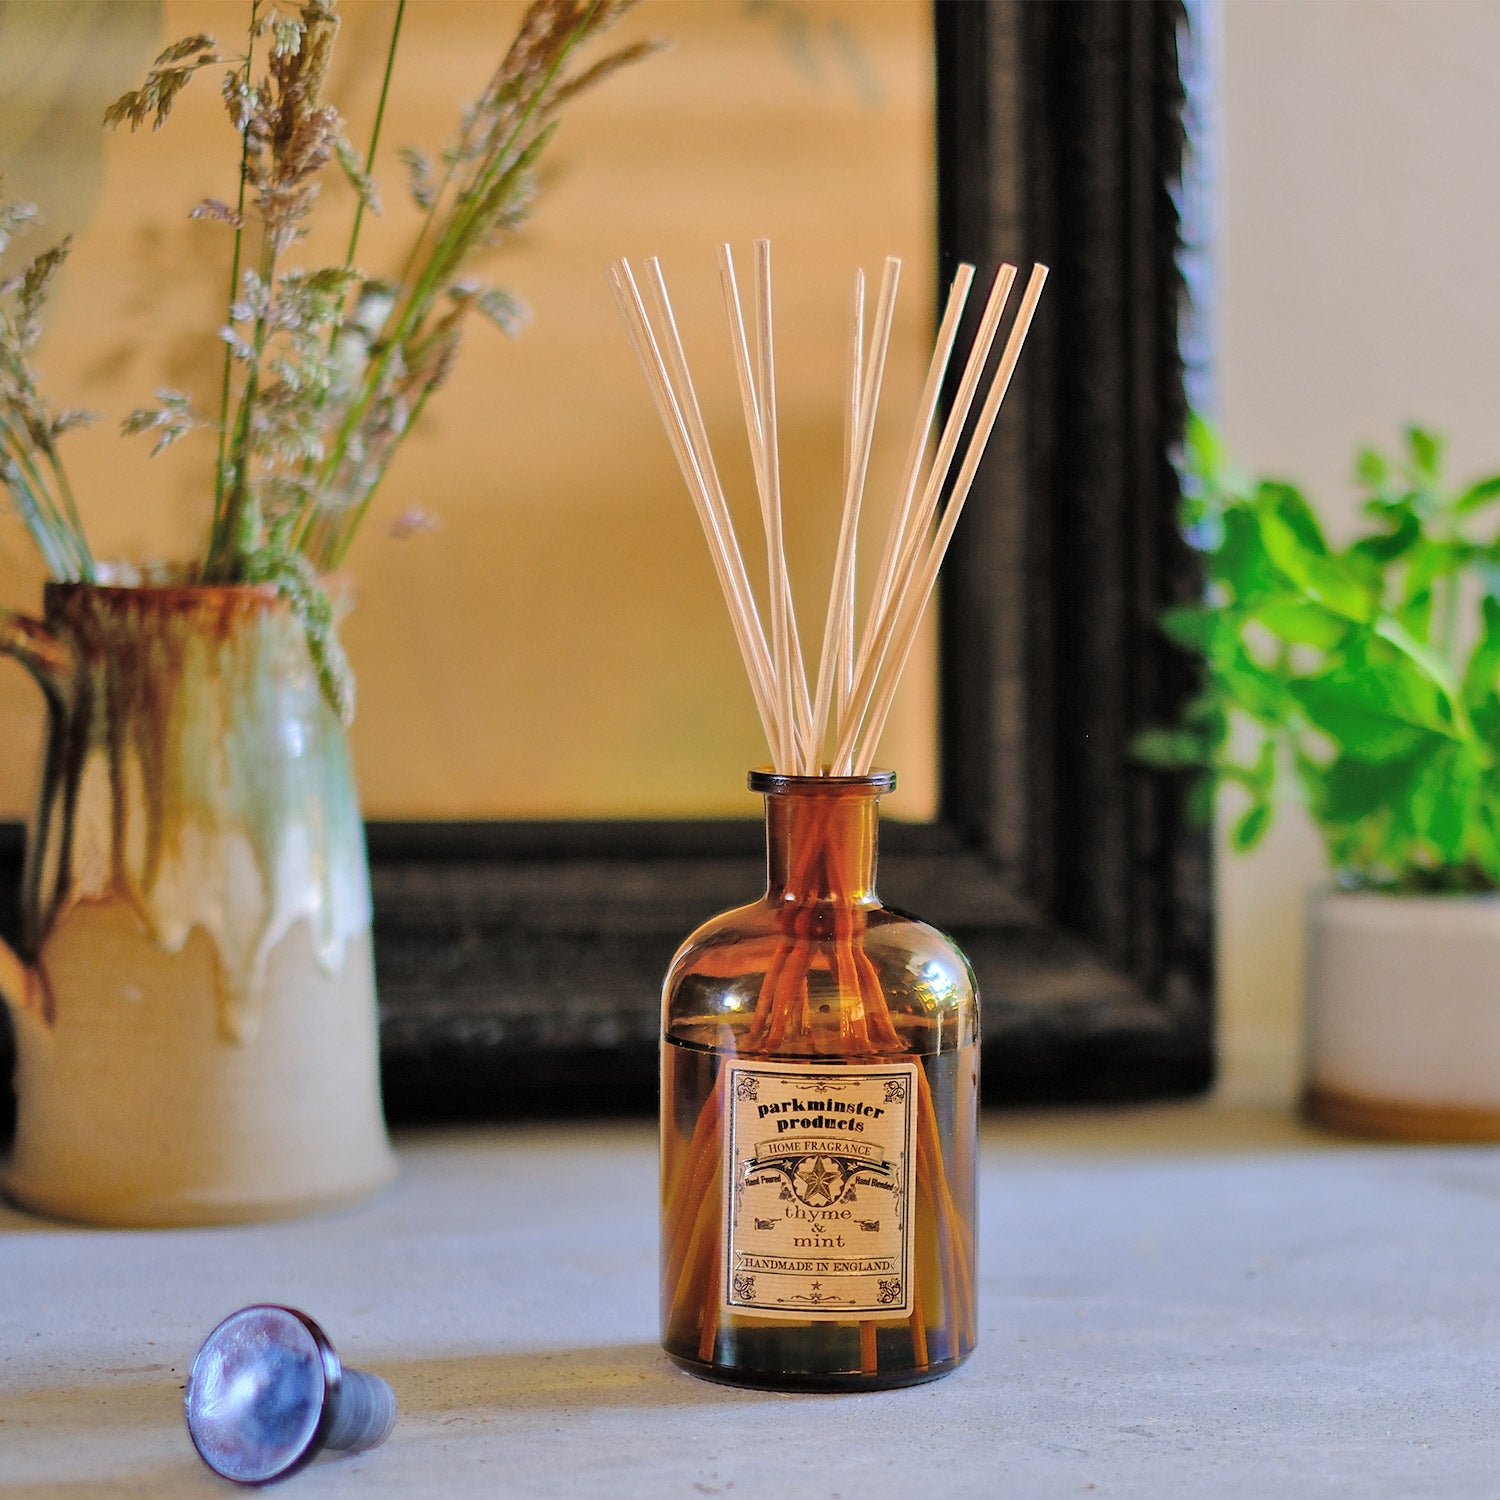 Infuse your home with the vibrant and herbal fragrance of Thyme & Mint from Parkminster's 200ml amber glass Apothecary Reed Diffuser. Made by hand in our Cornish workshop with 100% plant-based ingredients, this diffuser offers a modern and invigorating way to freshen your living space